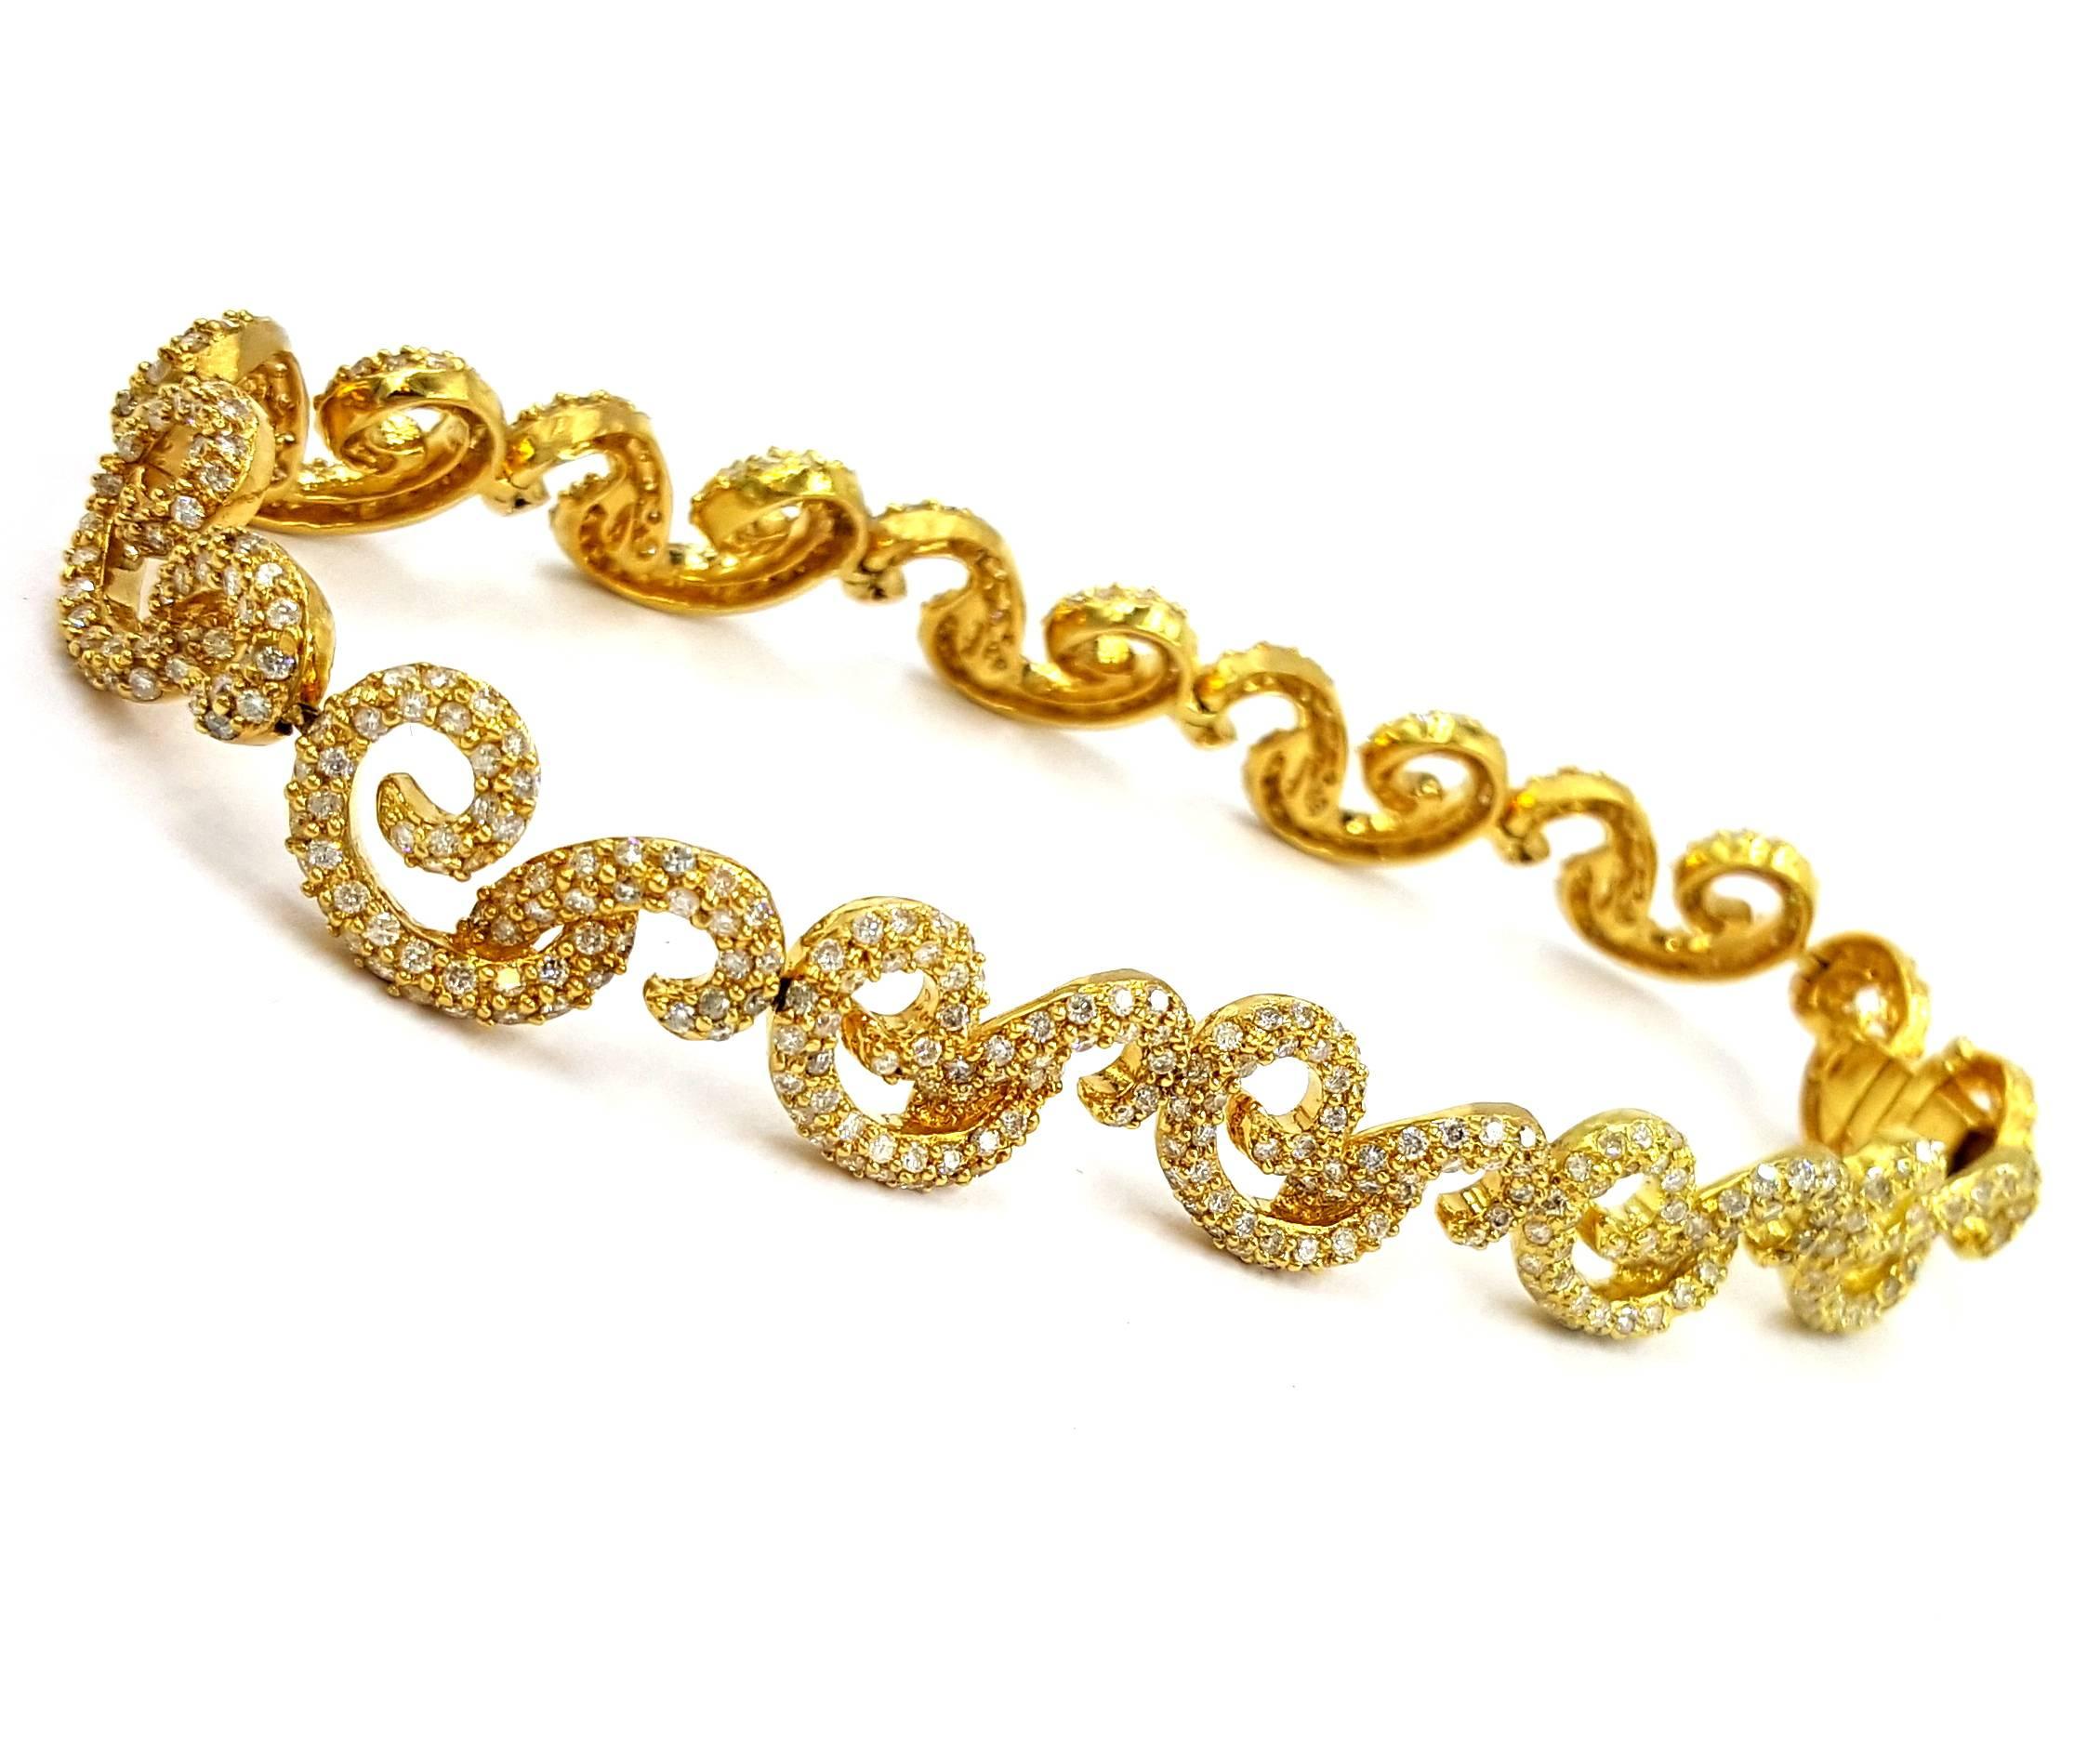 Sonia B Sonia Bitton 6 Carats Of Diamonds Beautifully Set in Gold Bracelet For Sale 2